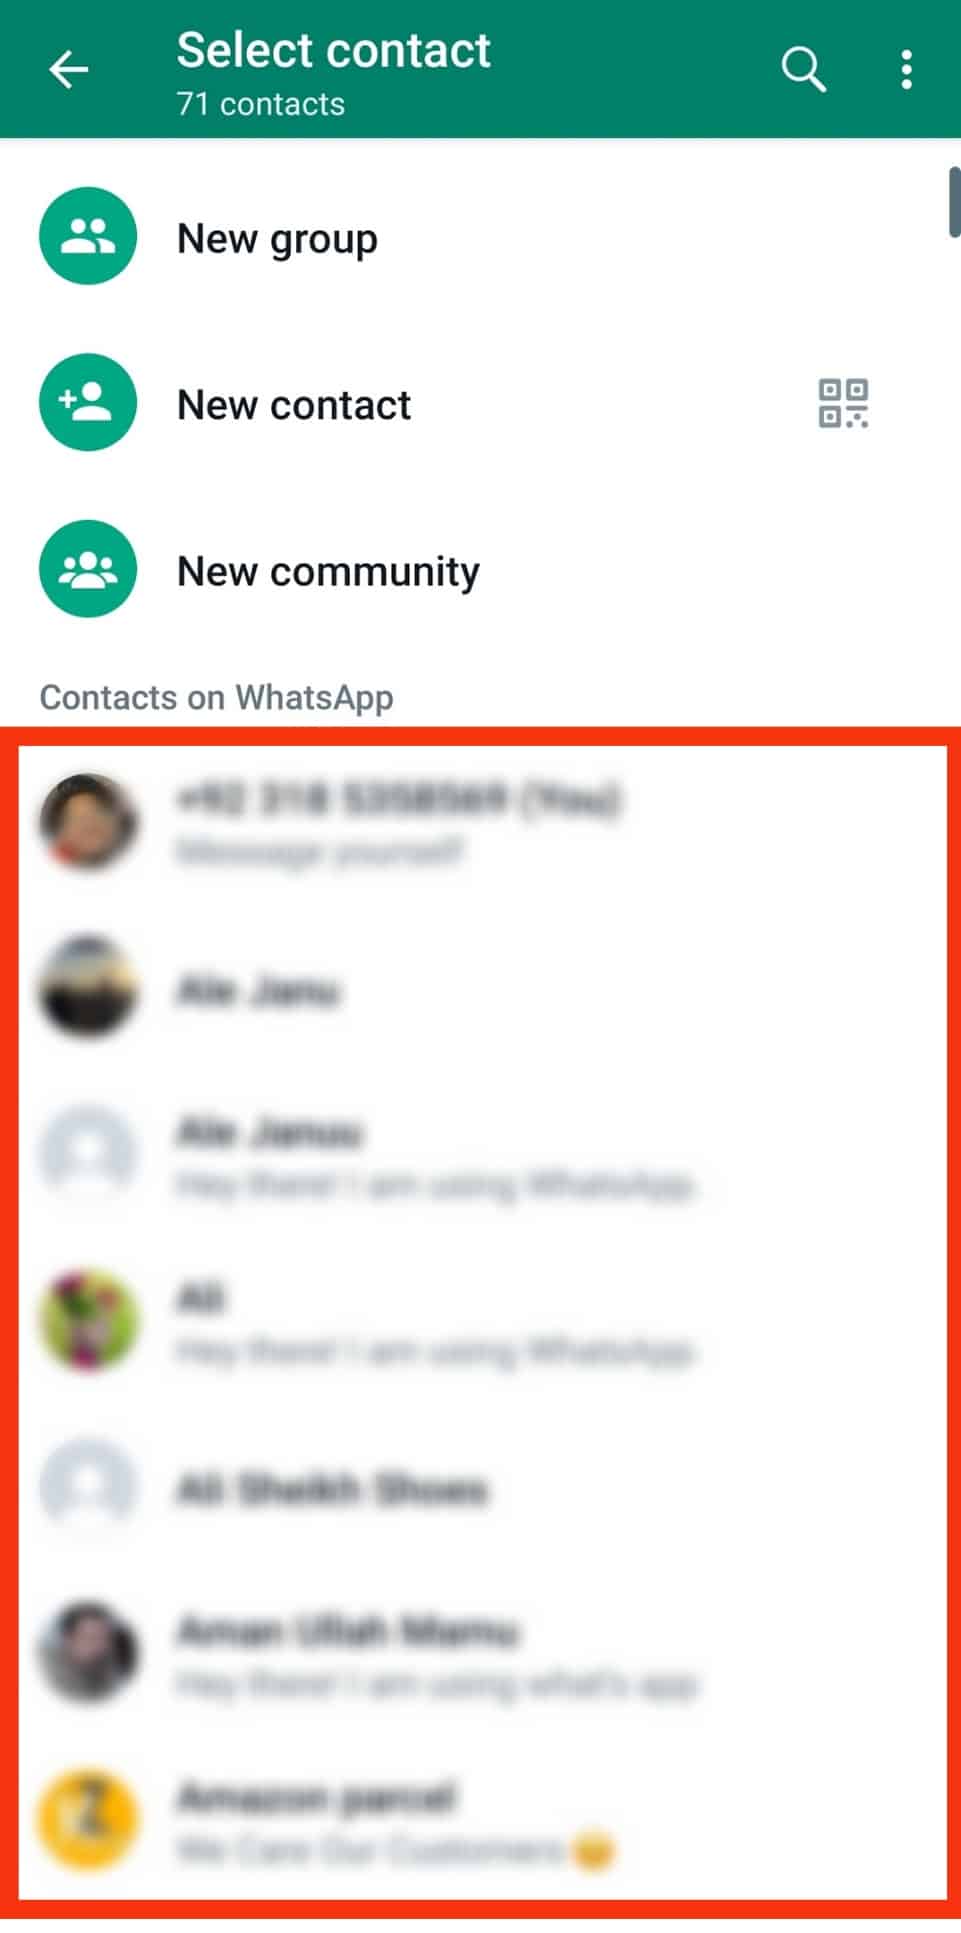 You'll See A List Of Your Whatsapp Contacts